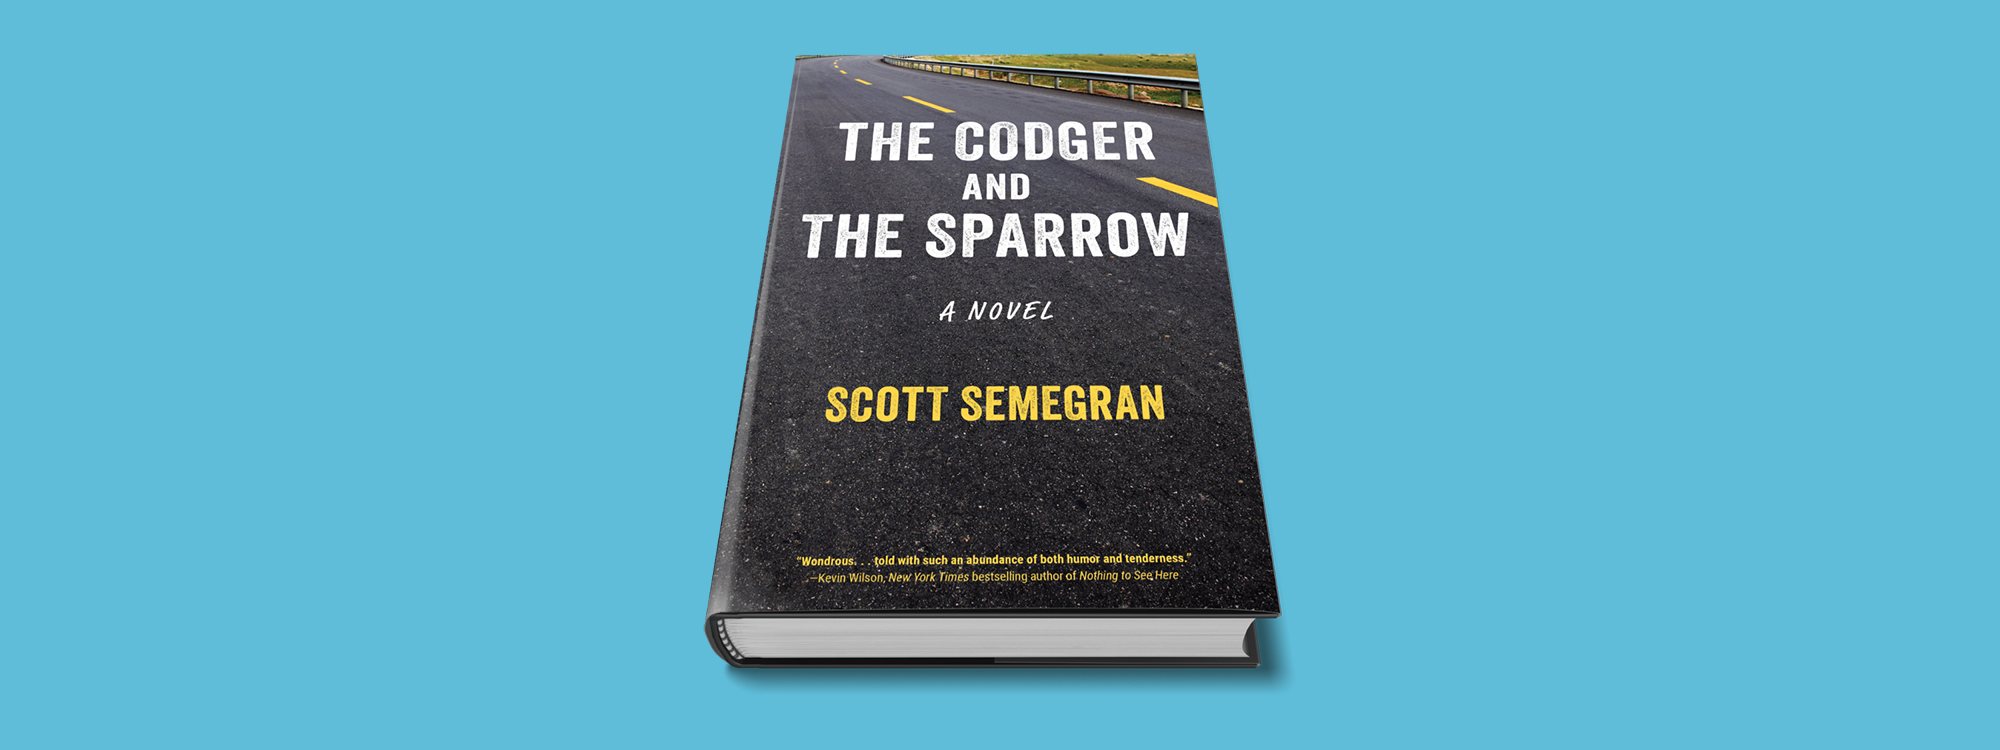 The Codger and the Sparrow book on blue background